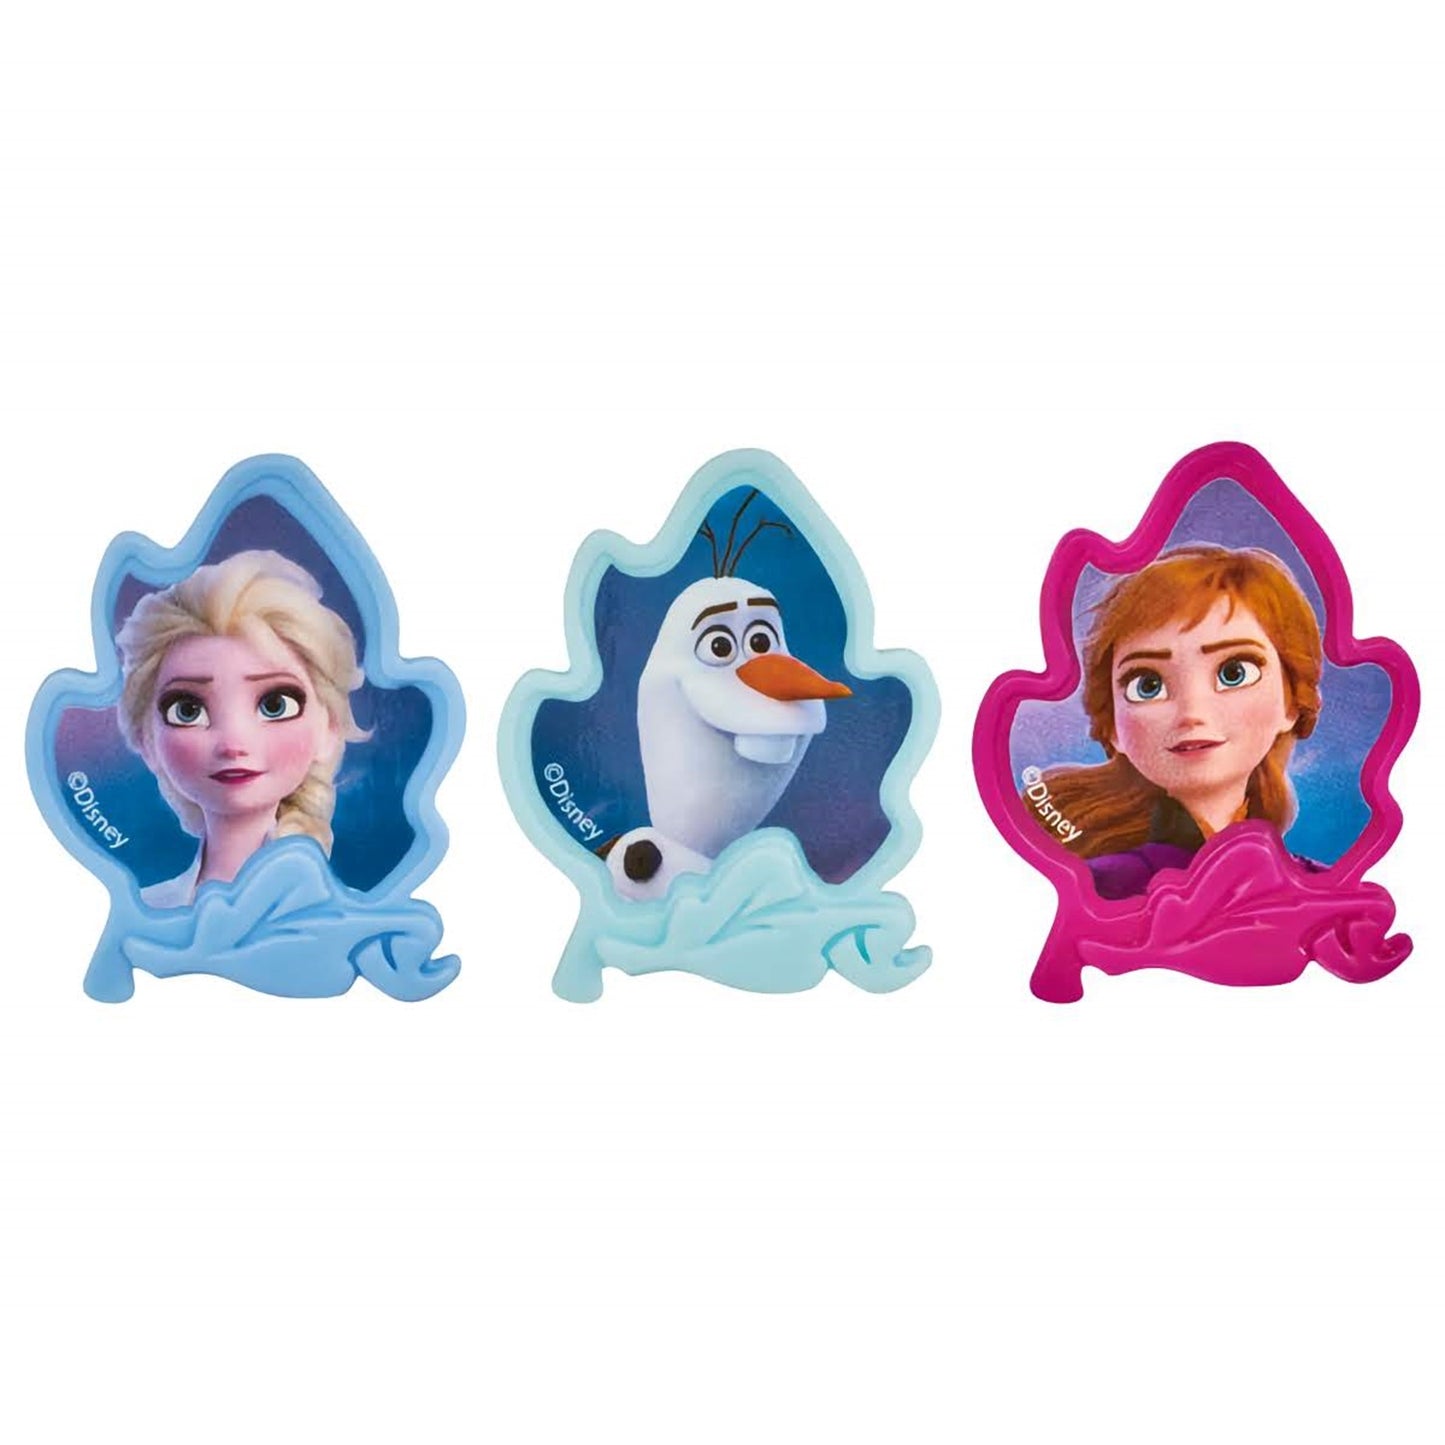 Enchanting cupcake toppers from 'Frozen II' with Elsa, Anna, and Olaf, capturing the magic of the movie in edible form, perfect for a Frozen-themed party, from Lynn's Cake, Candy, and Chocolate Supplies.